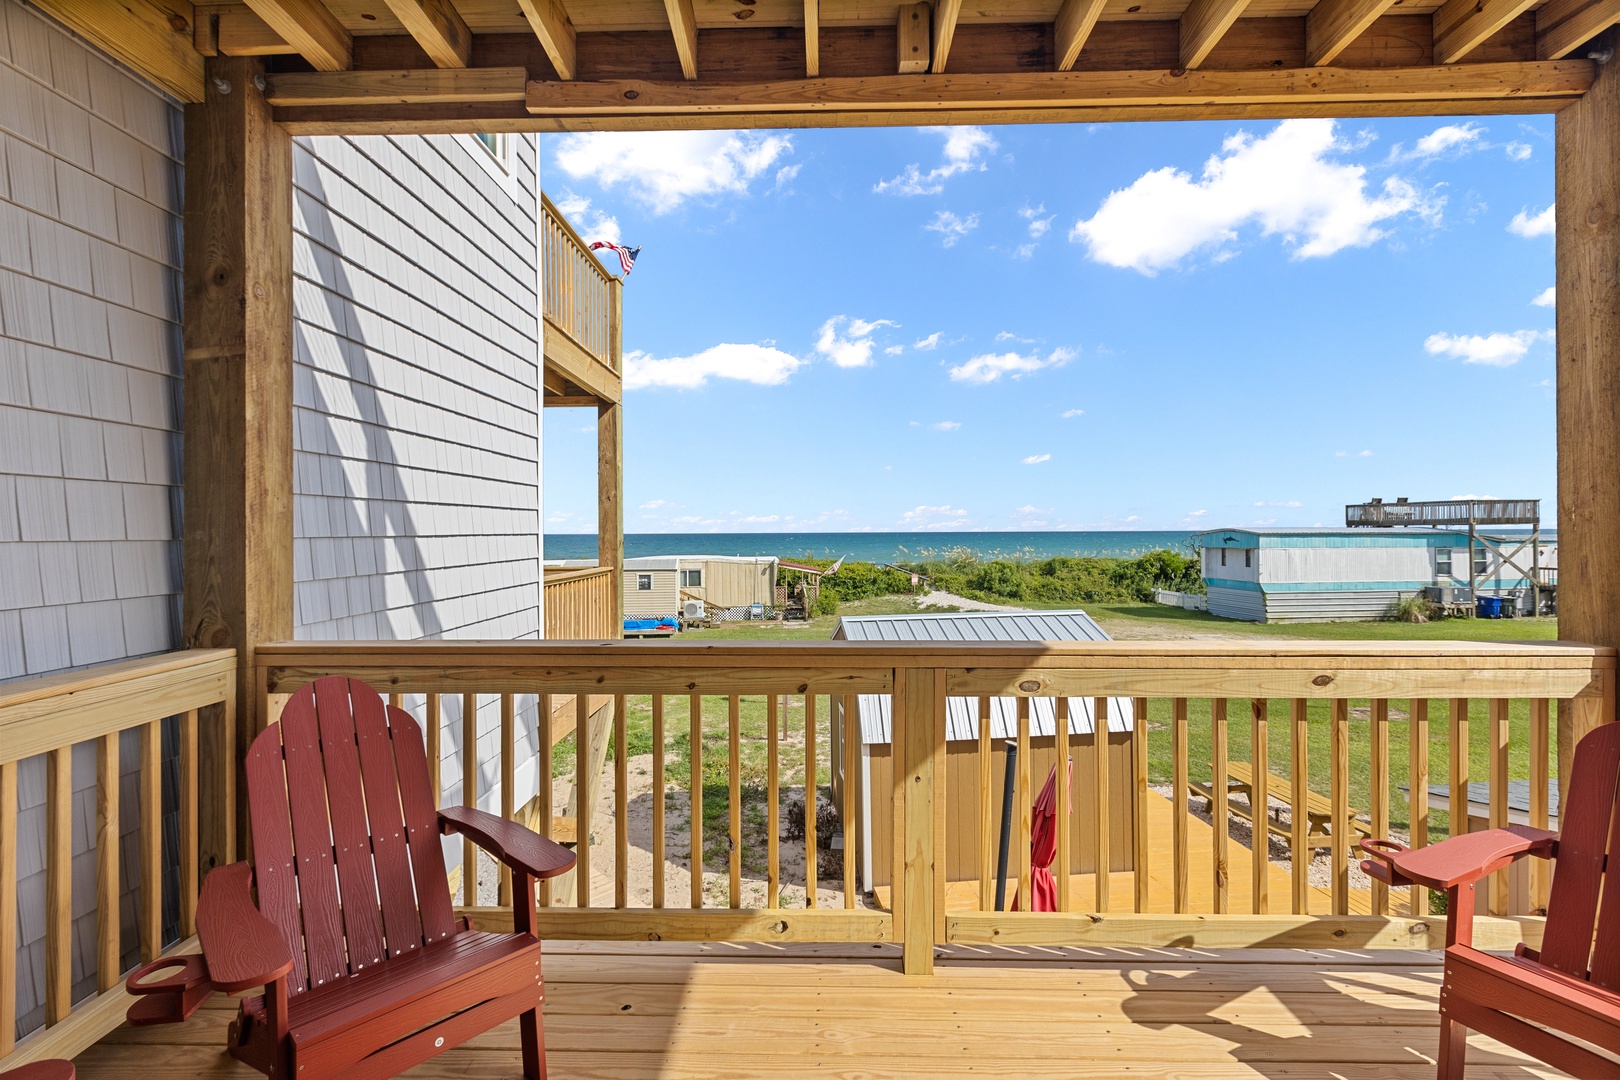 The lower level ocean view porch